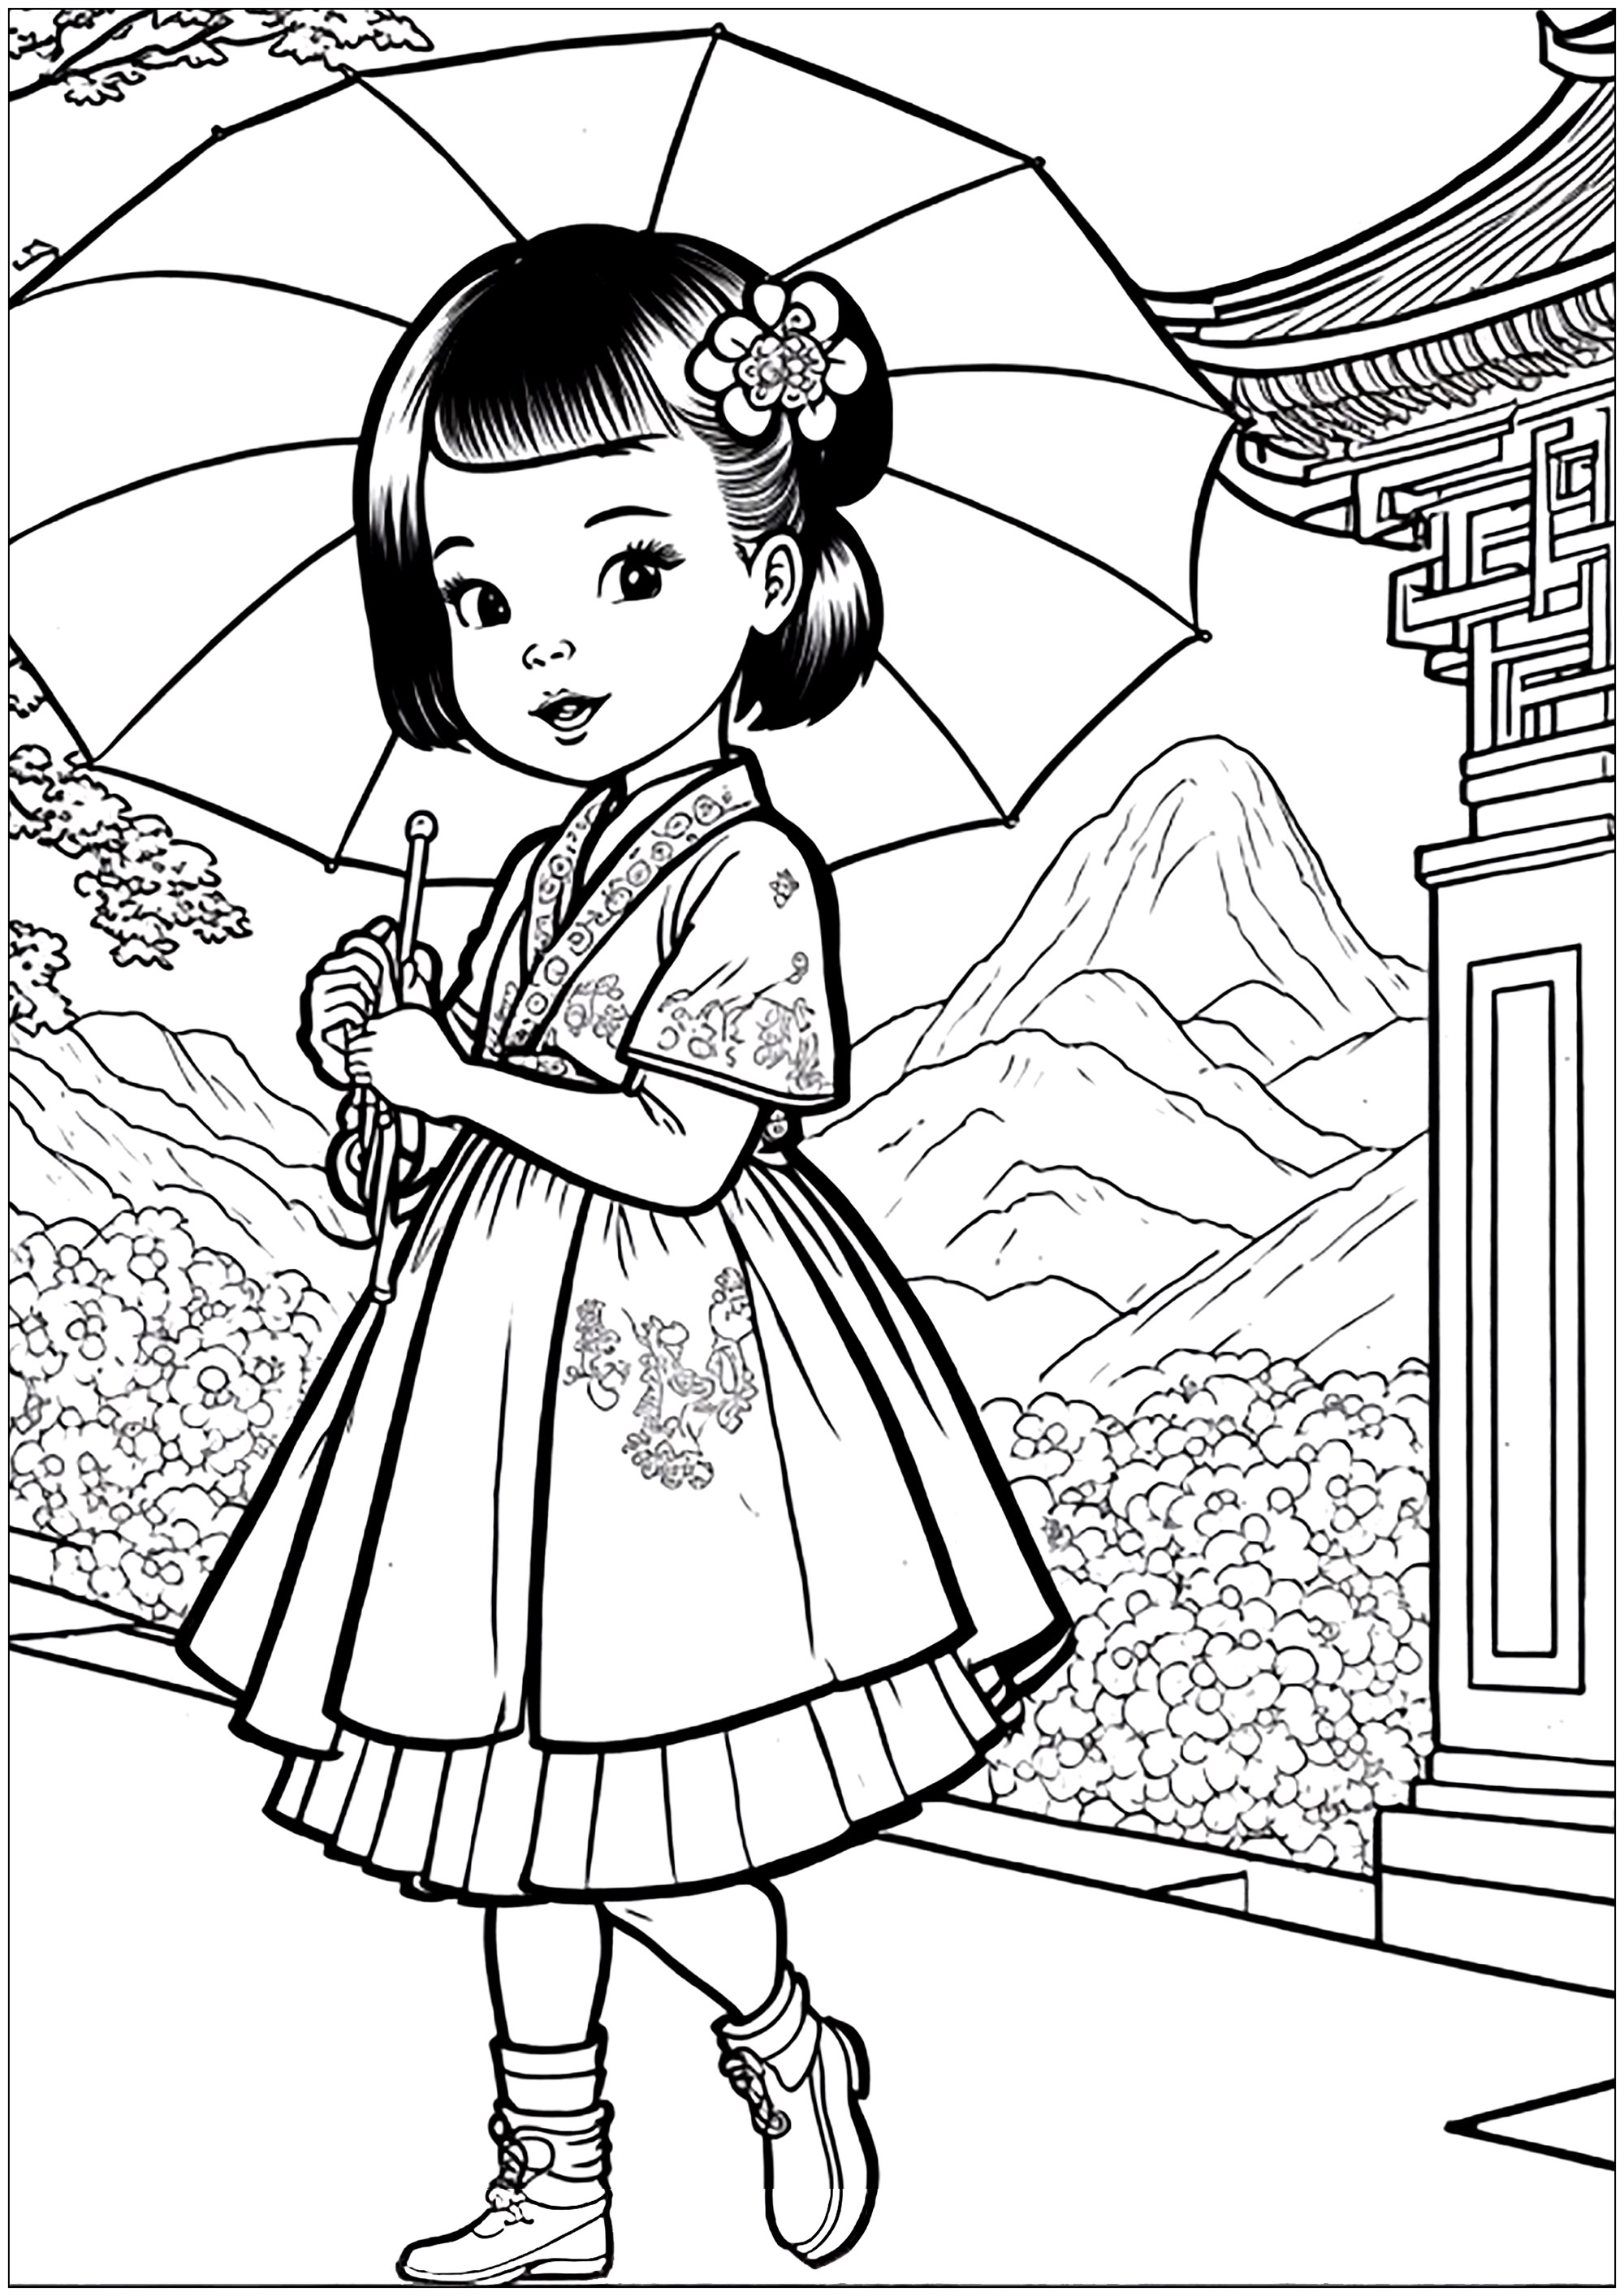 Chinese girl and her umbrella to color. Also color the beautiful temple and the beautiful landscape in the background